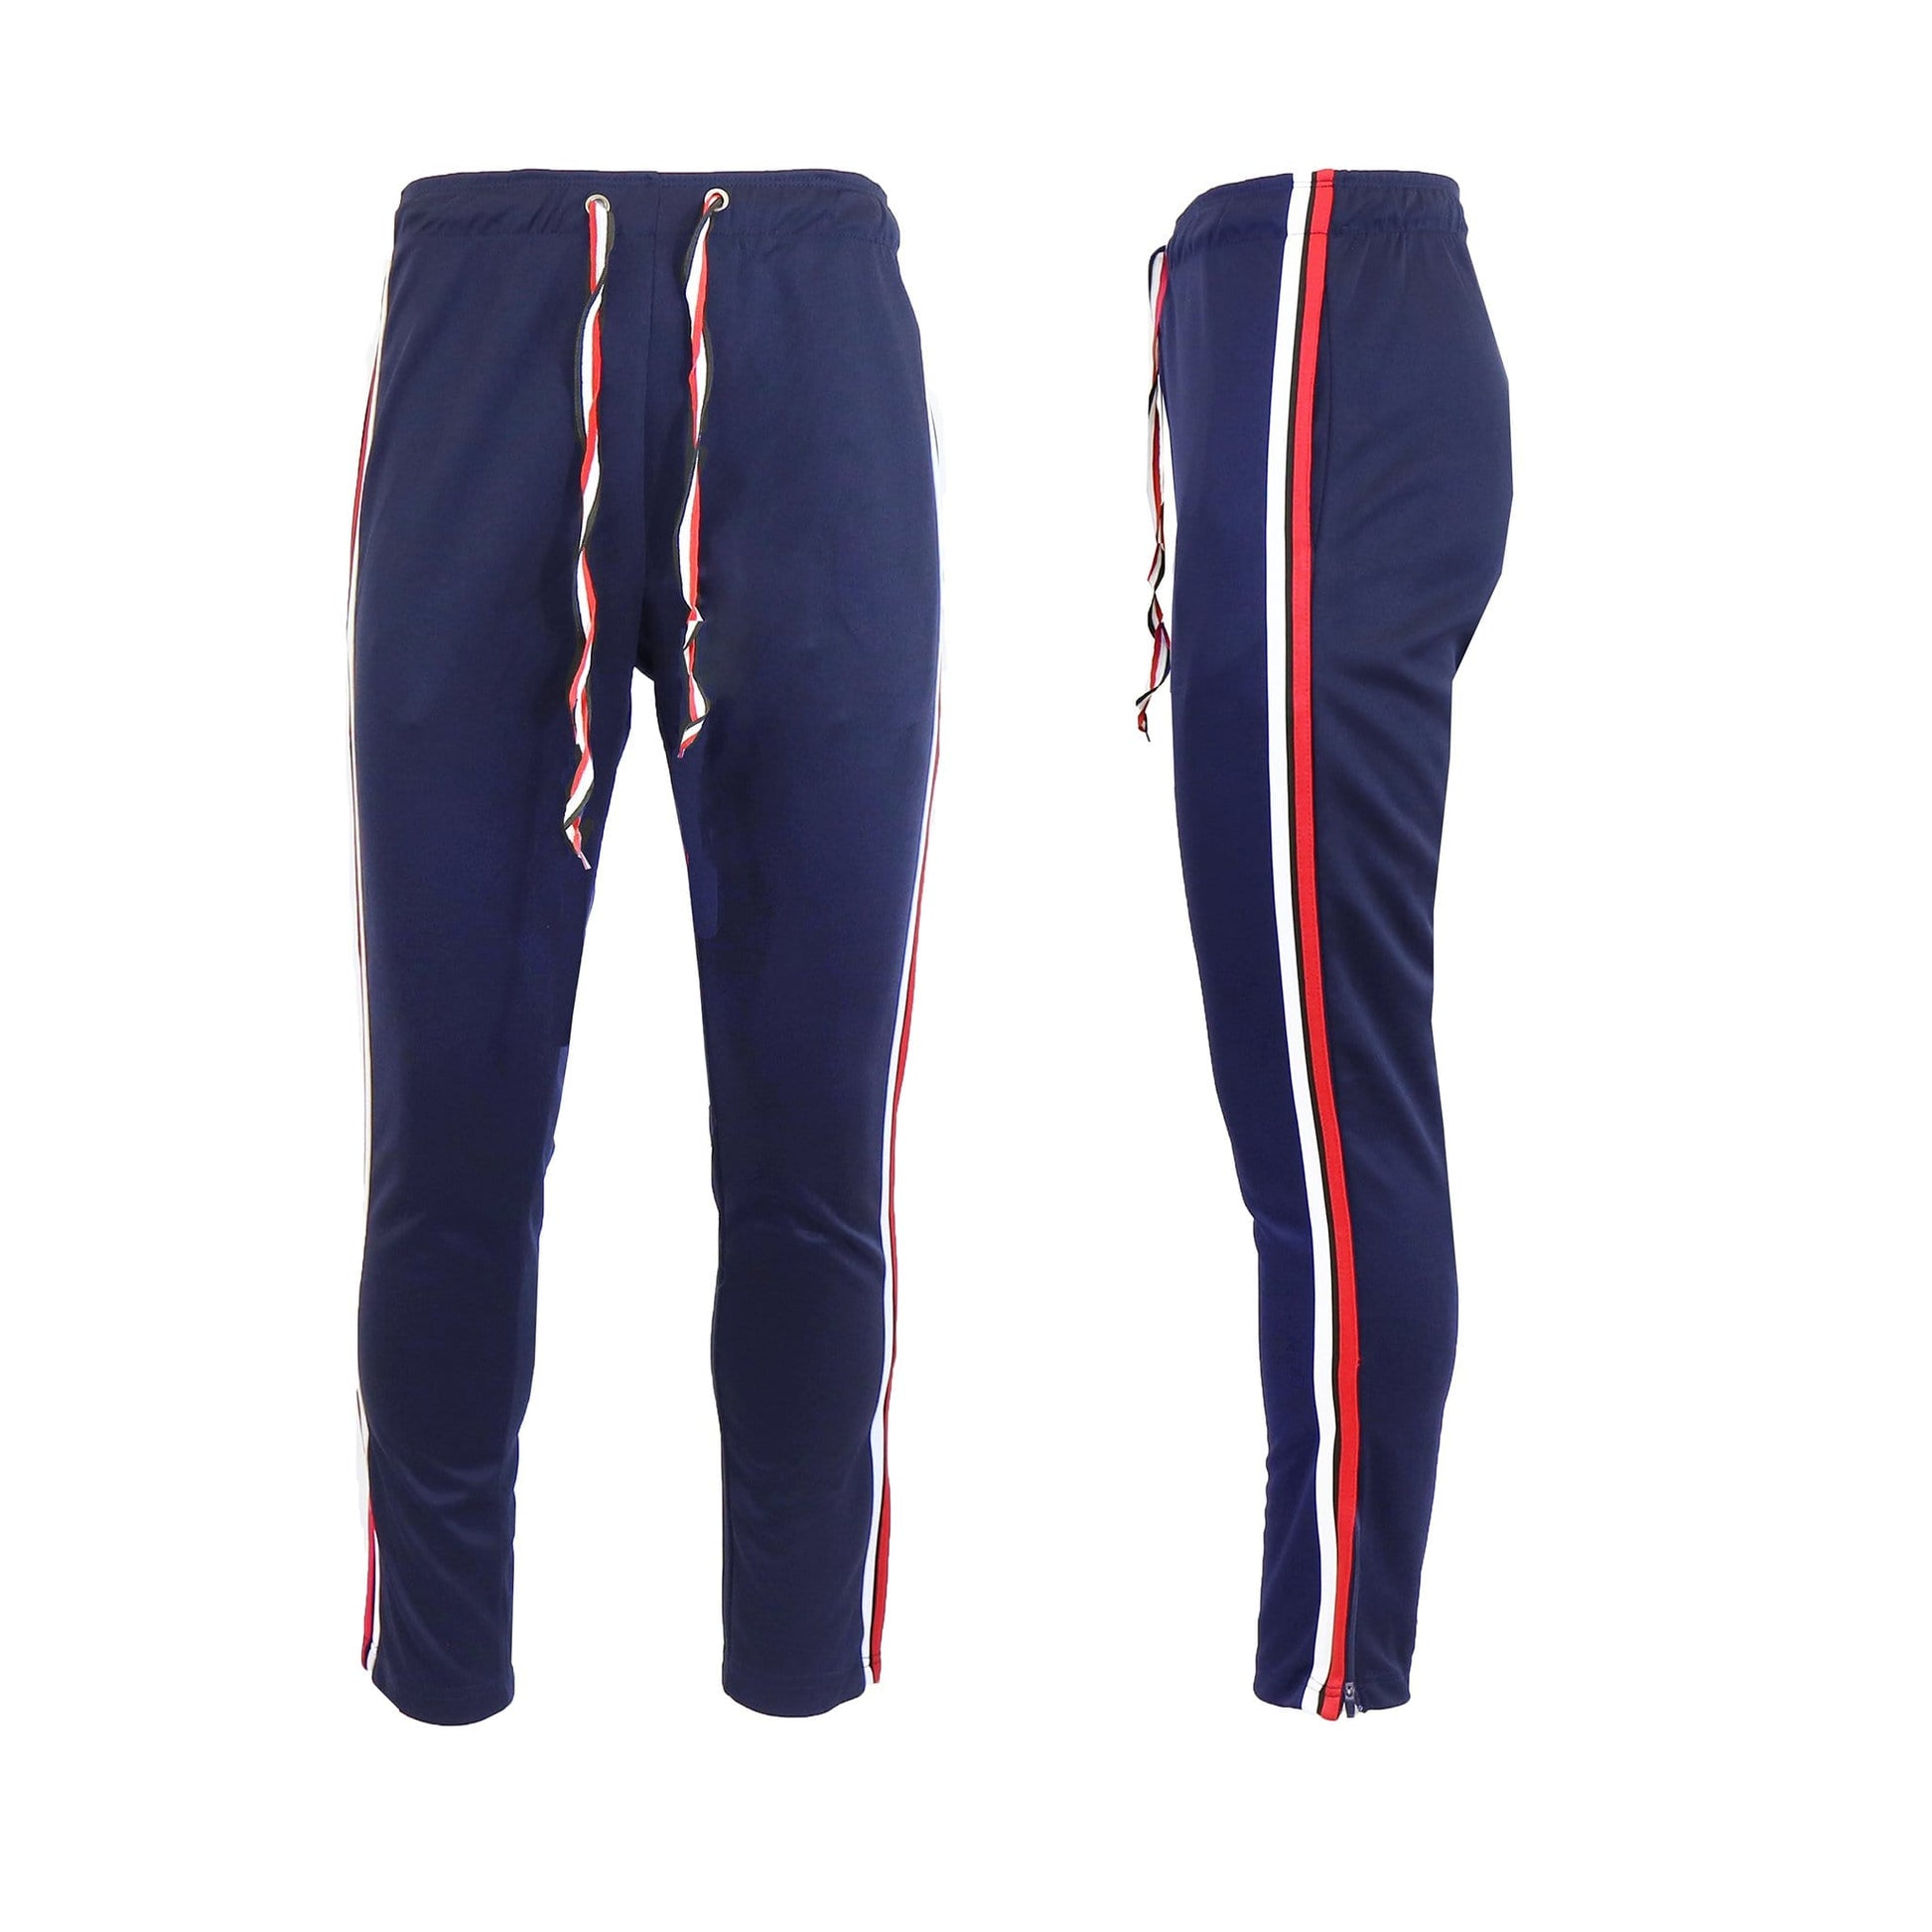 Training Pant 600 - GalaxybyHarvic